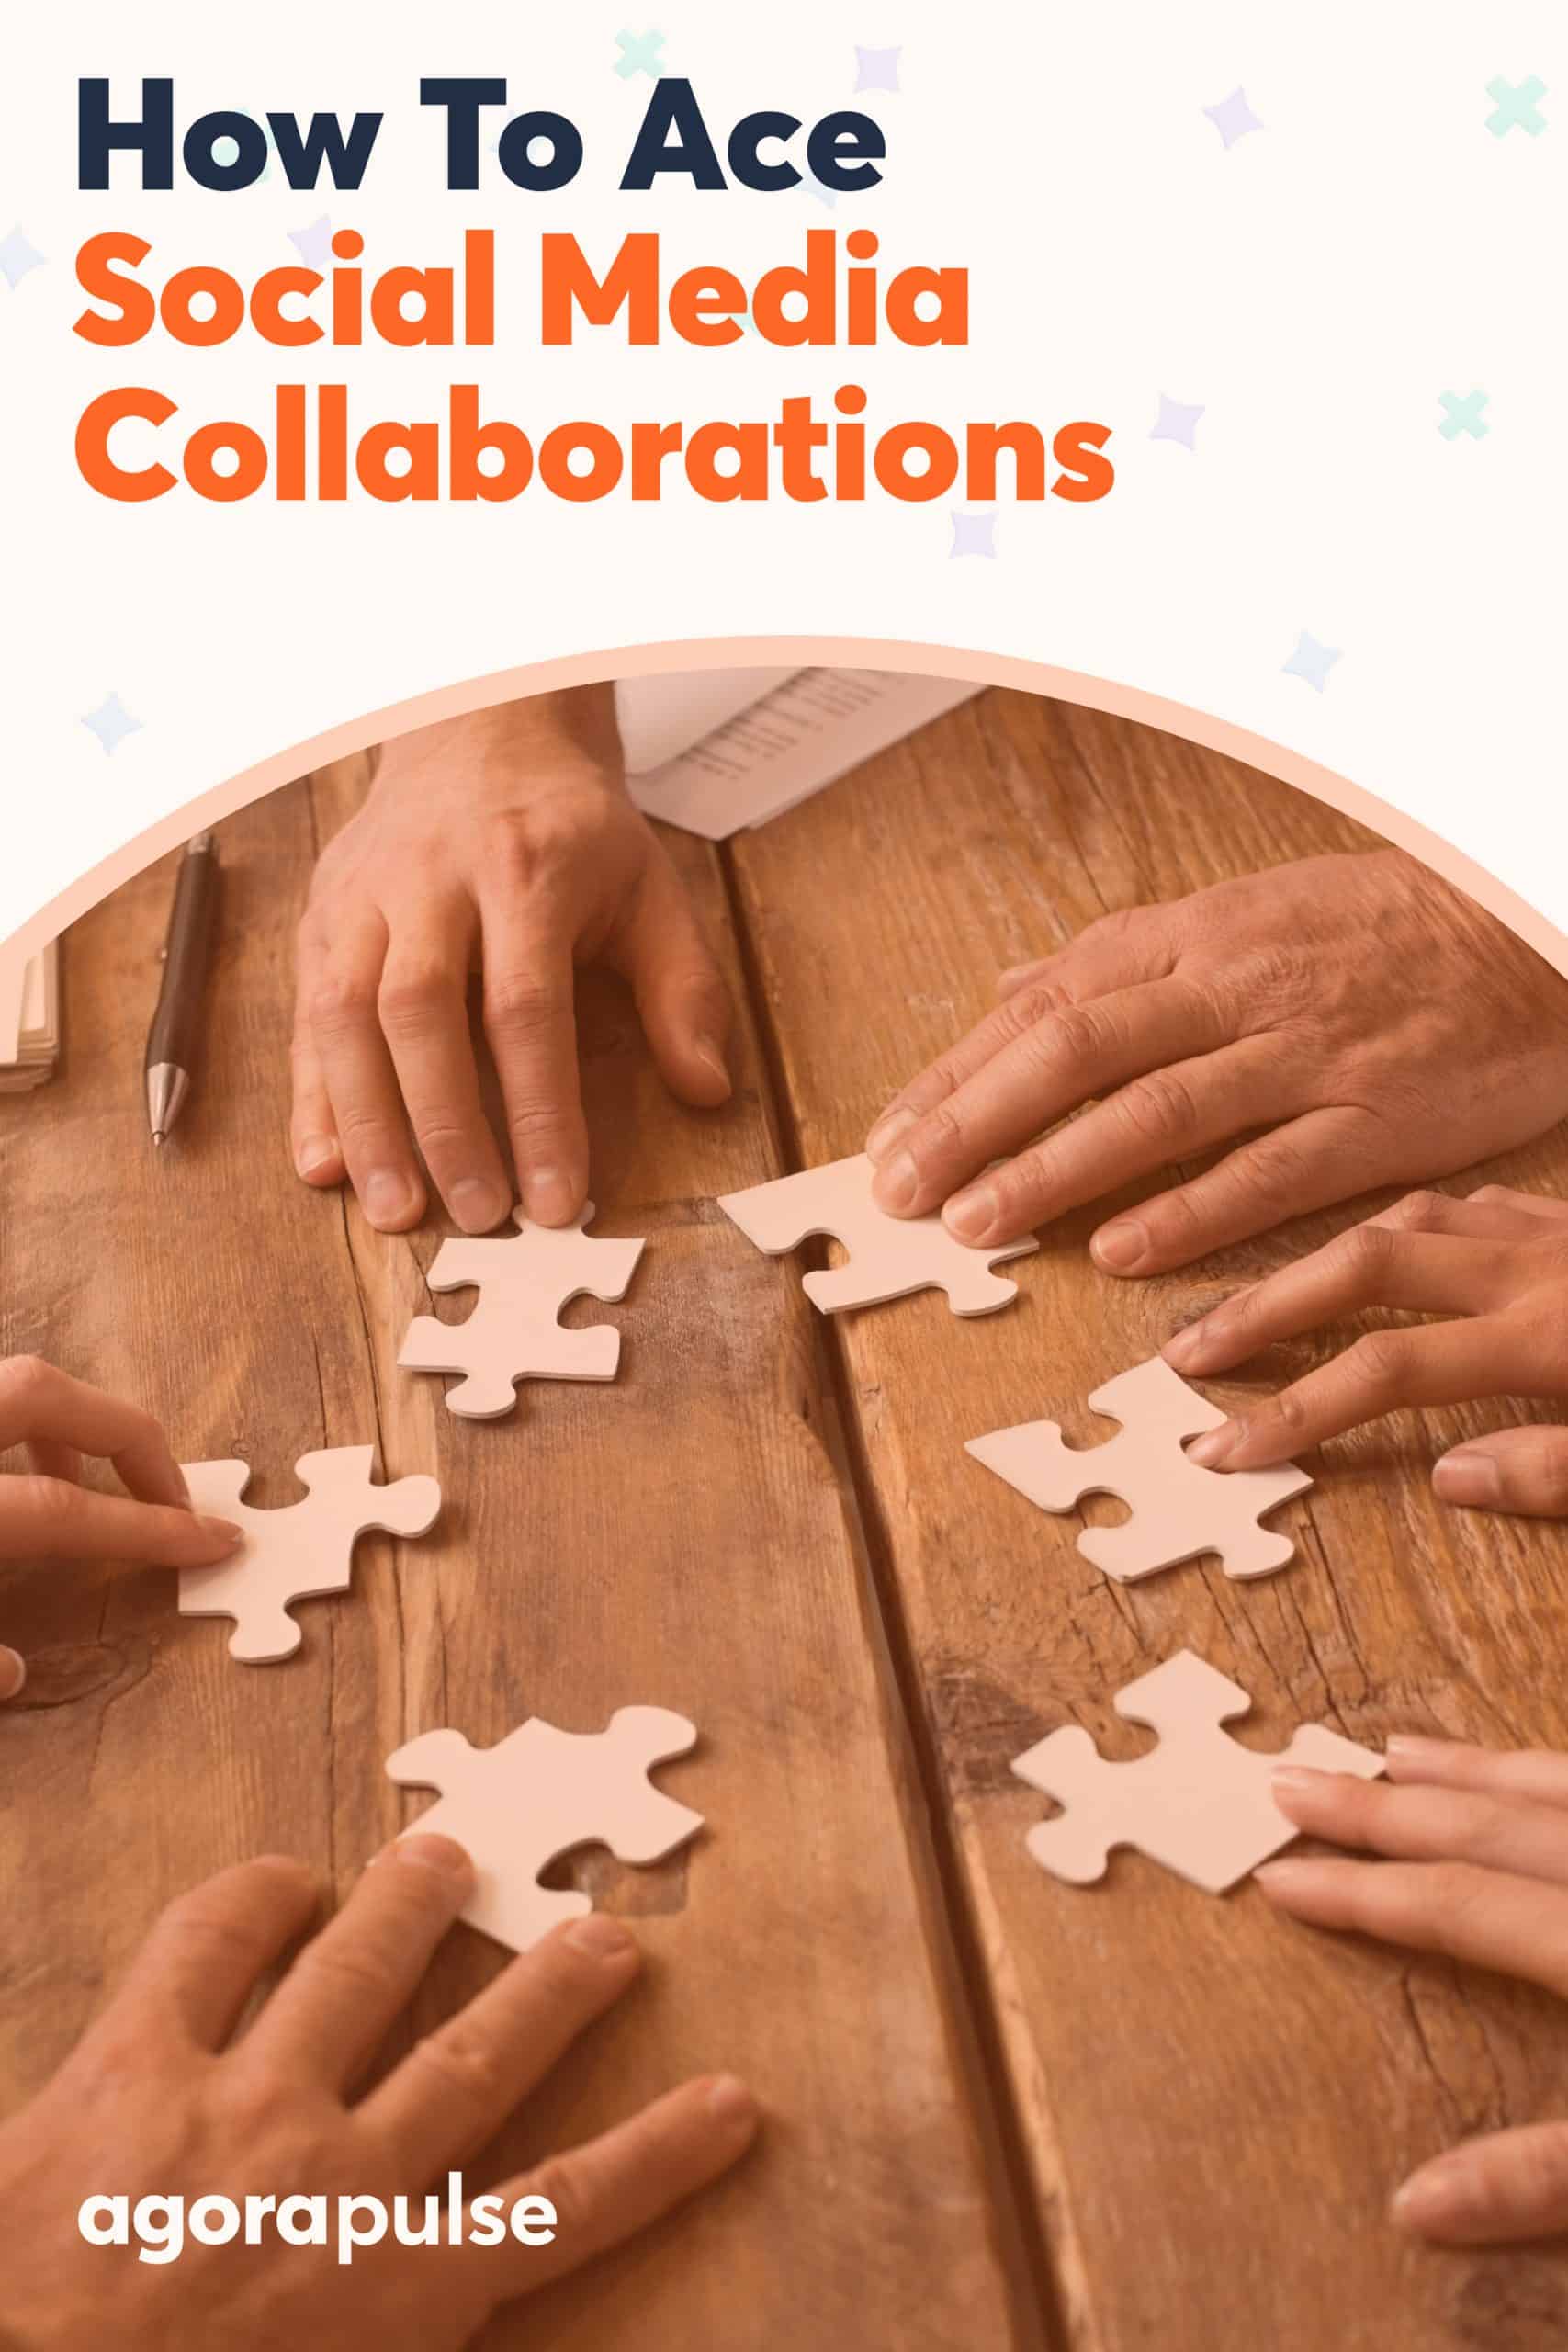 How Your Team Can Ace Social Media Collaboration